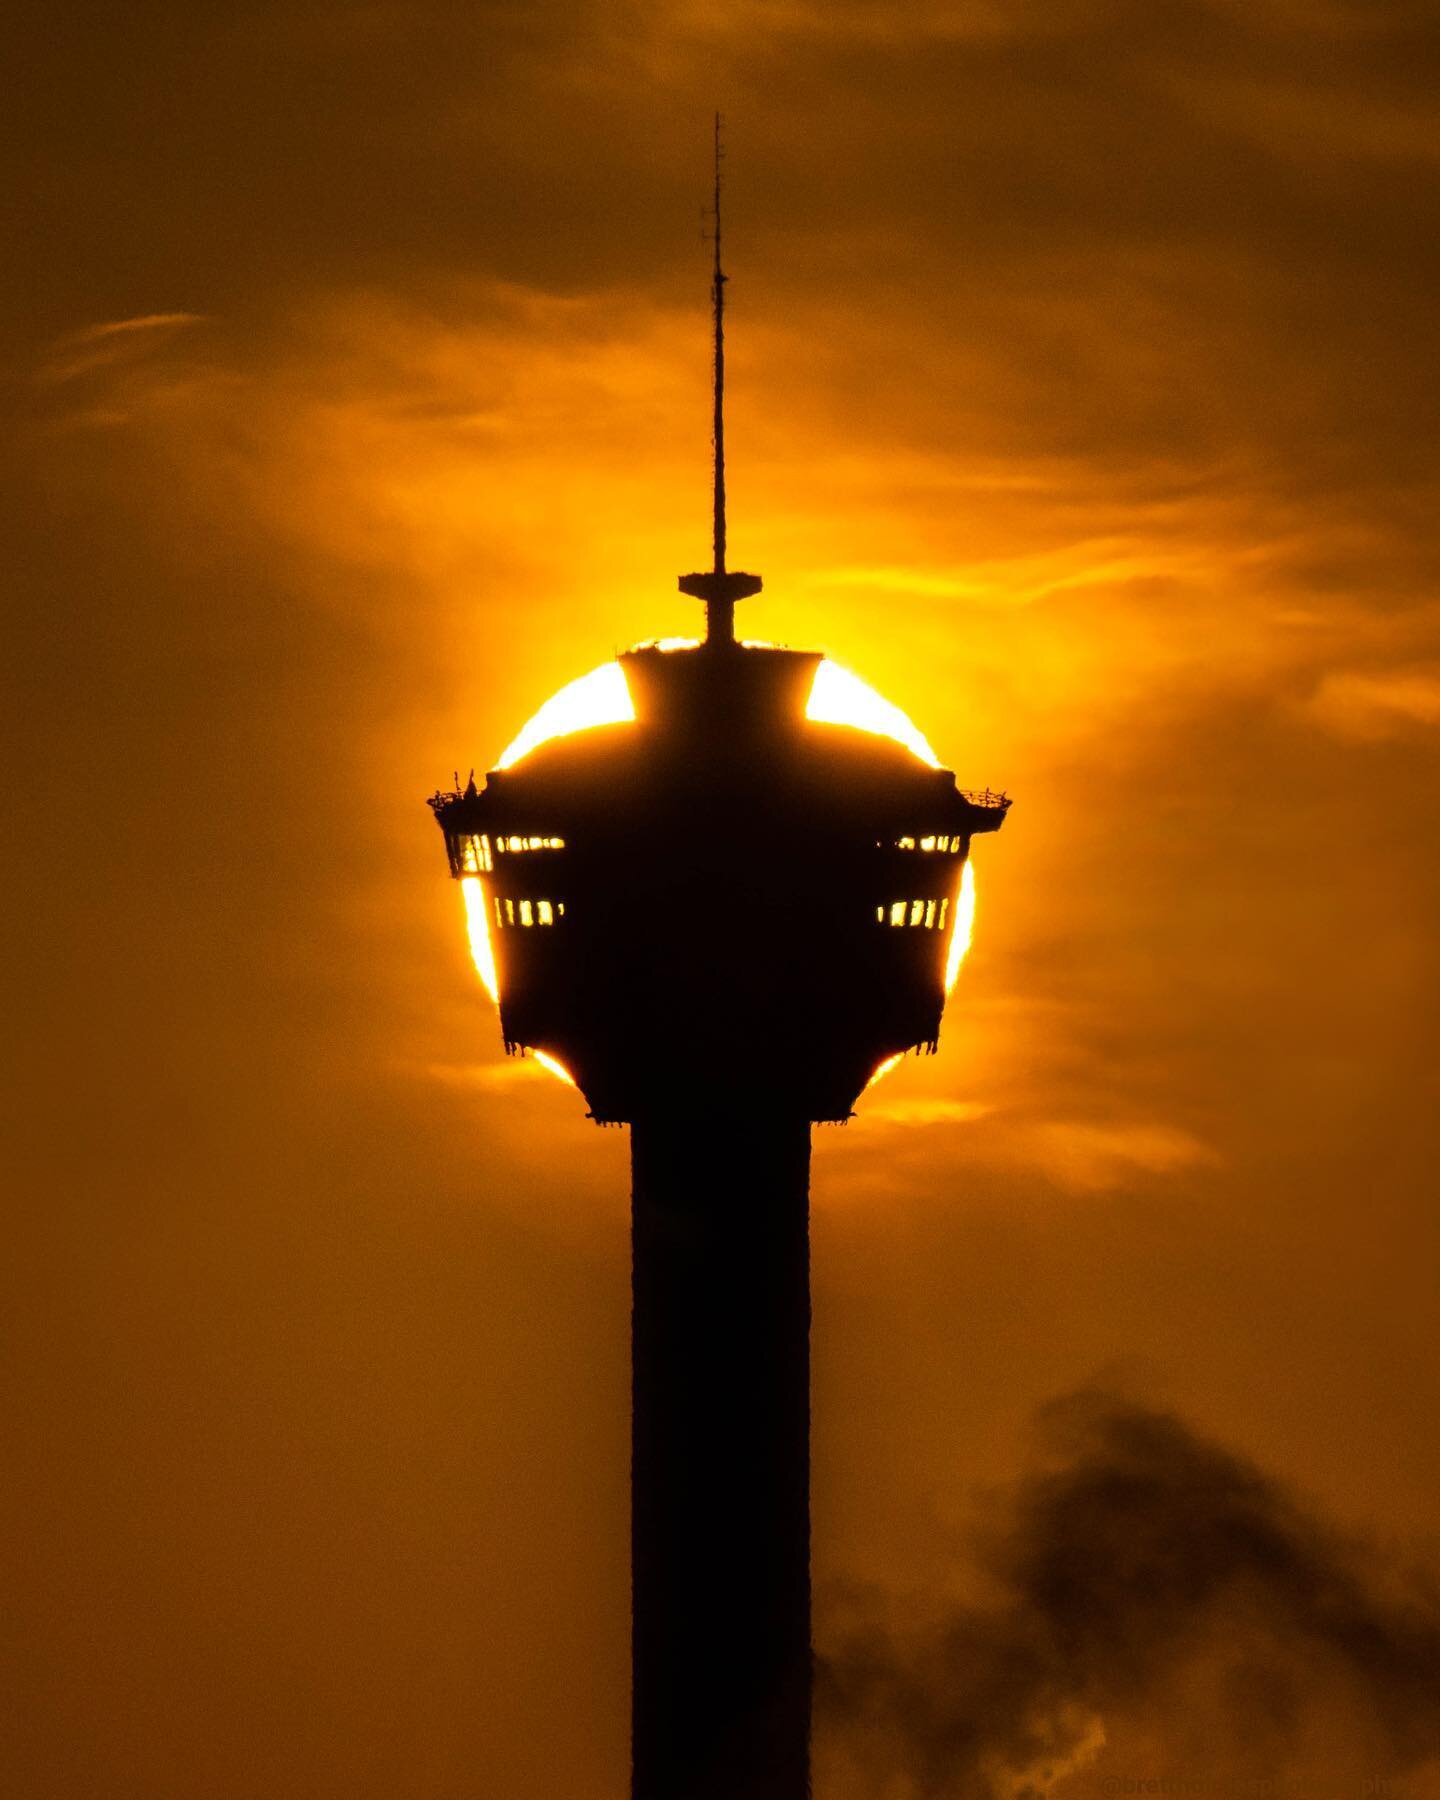 Rise &amp; Shine!

This year&rsquo;s edition of the Calgary Tower Eclipse, taken this morning. 

The sun is so bright(!) believe it or not, so last year I took a piece of arc welding glass out with my to protect my eyes. This year, after having switc